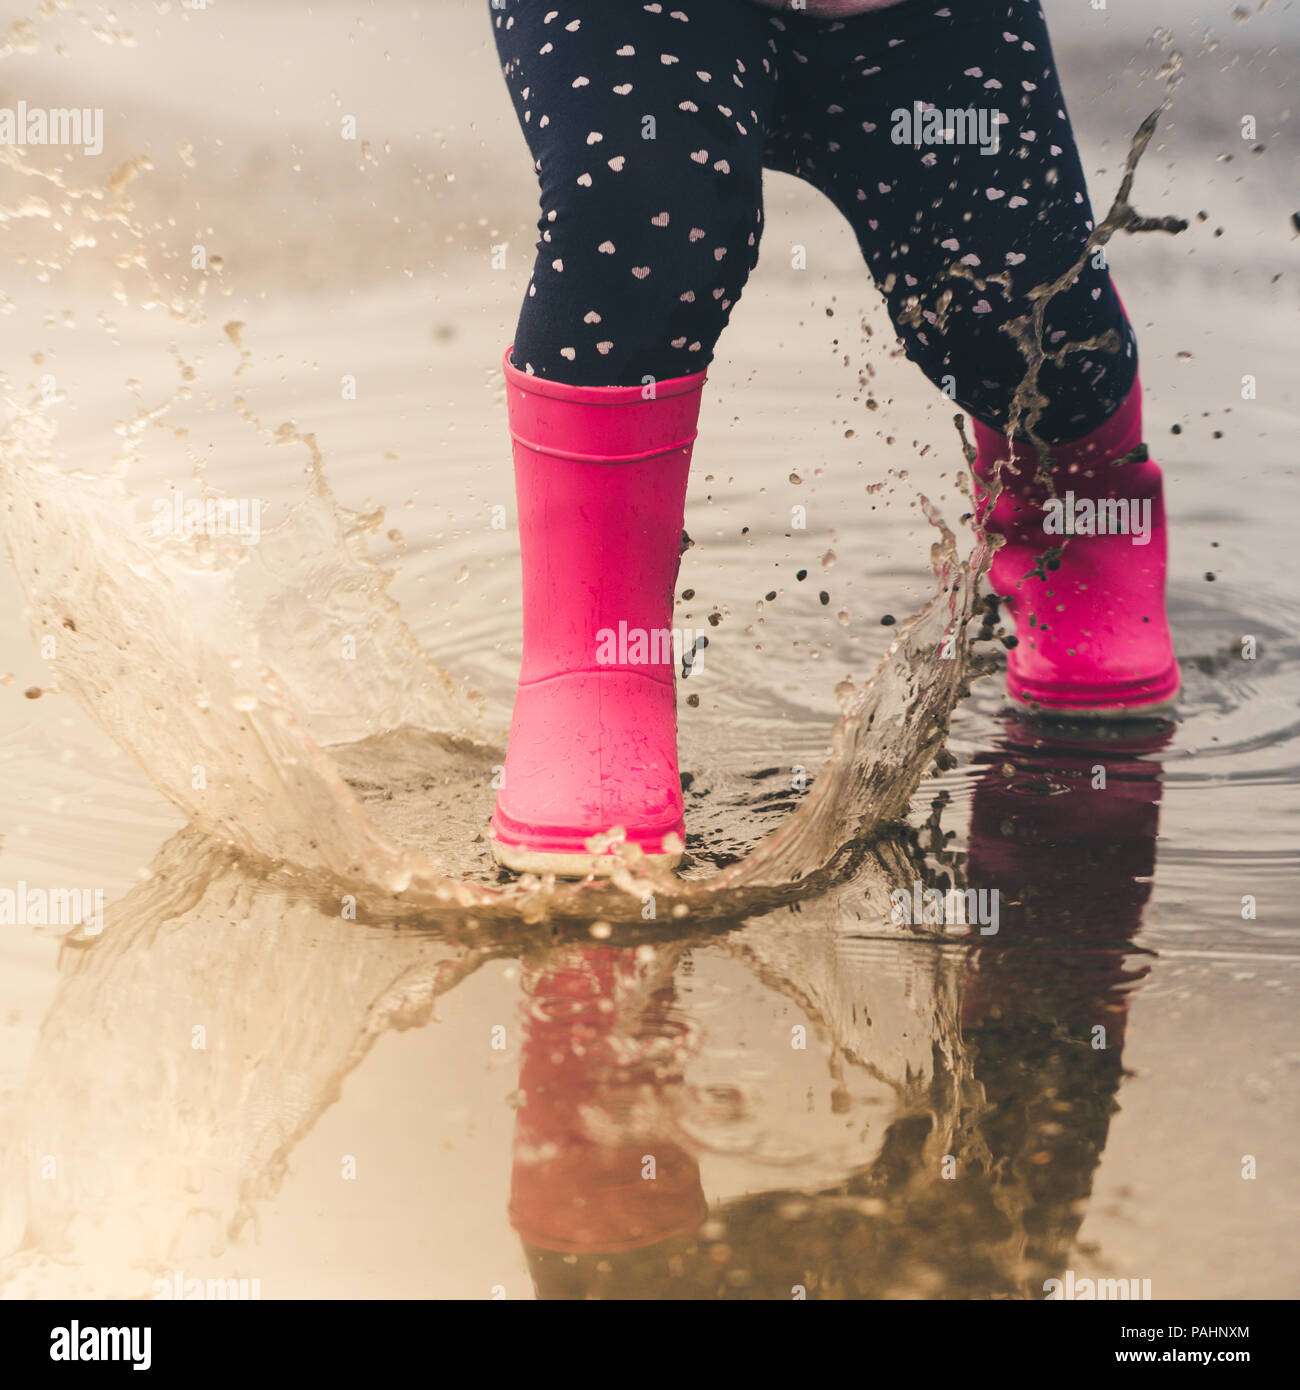 Feet of child in pink rubber boots jumping and splashing over puddle after rain. Stock Photo